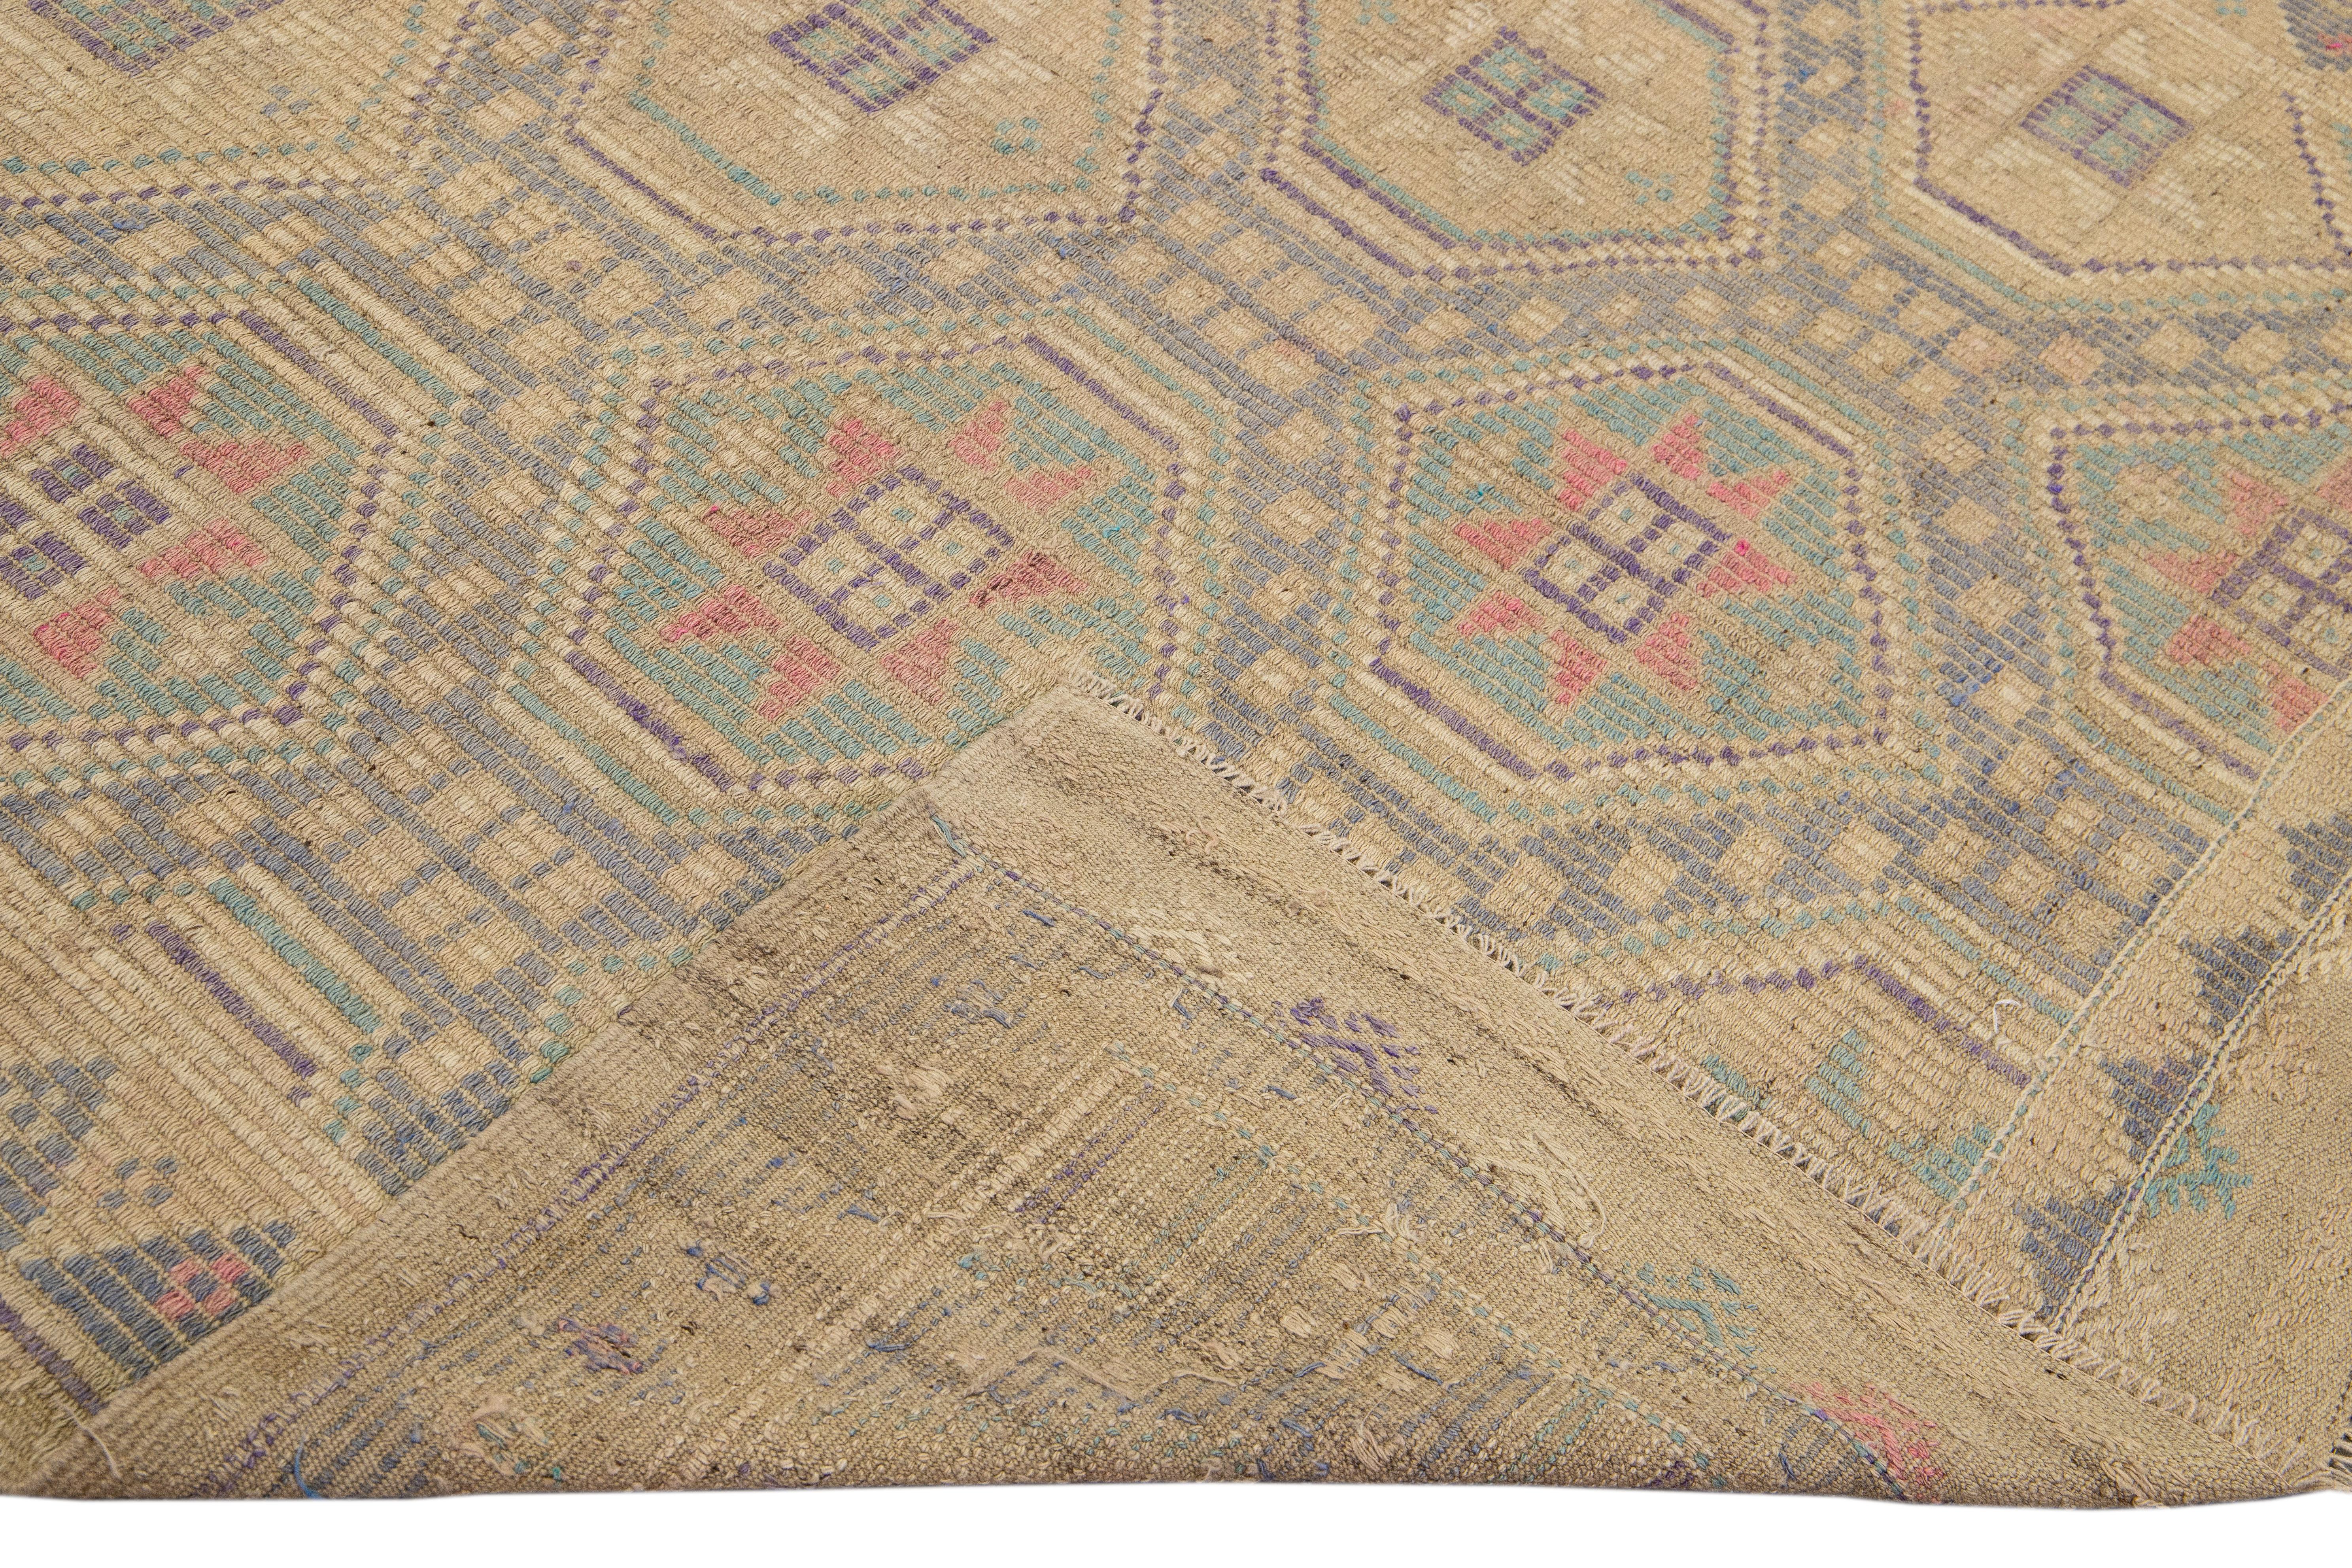 Beautiful vintage Soumak hand-knotted wool rug with a tan field. This piece has purple, blue, and pink accents in a gorgeous all-over geometric medallion motif design with tan fringes.

This rug measures 6'5